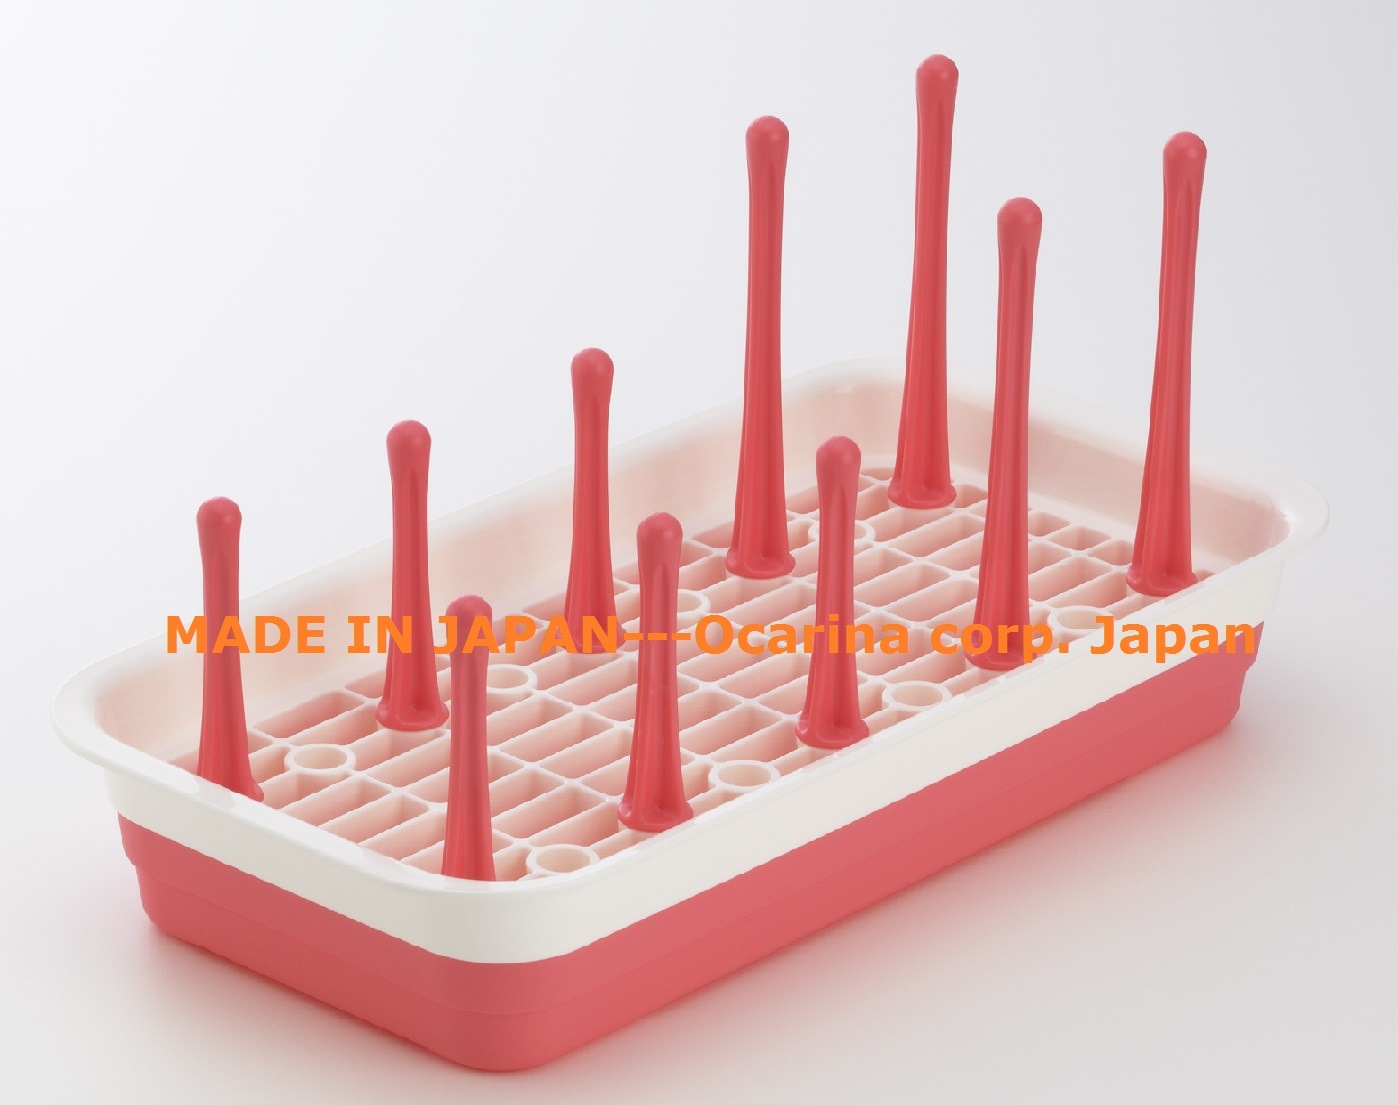 Compact Plastic Drainer Rack for Tableware and Kitchen Storage (Model. 0052)